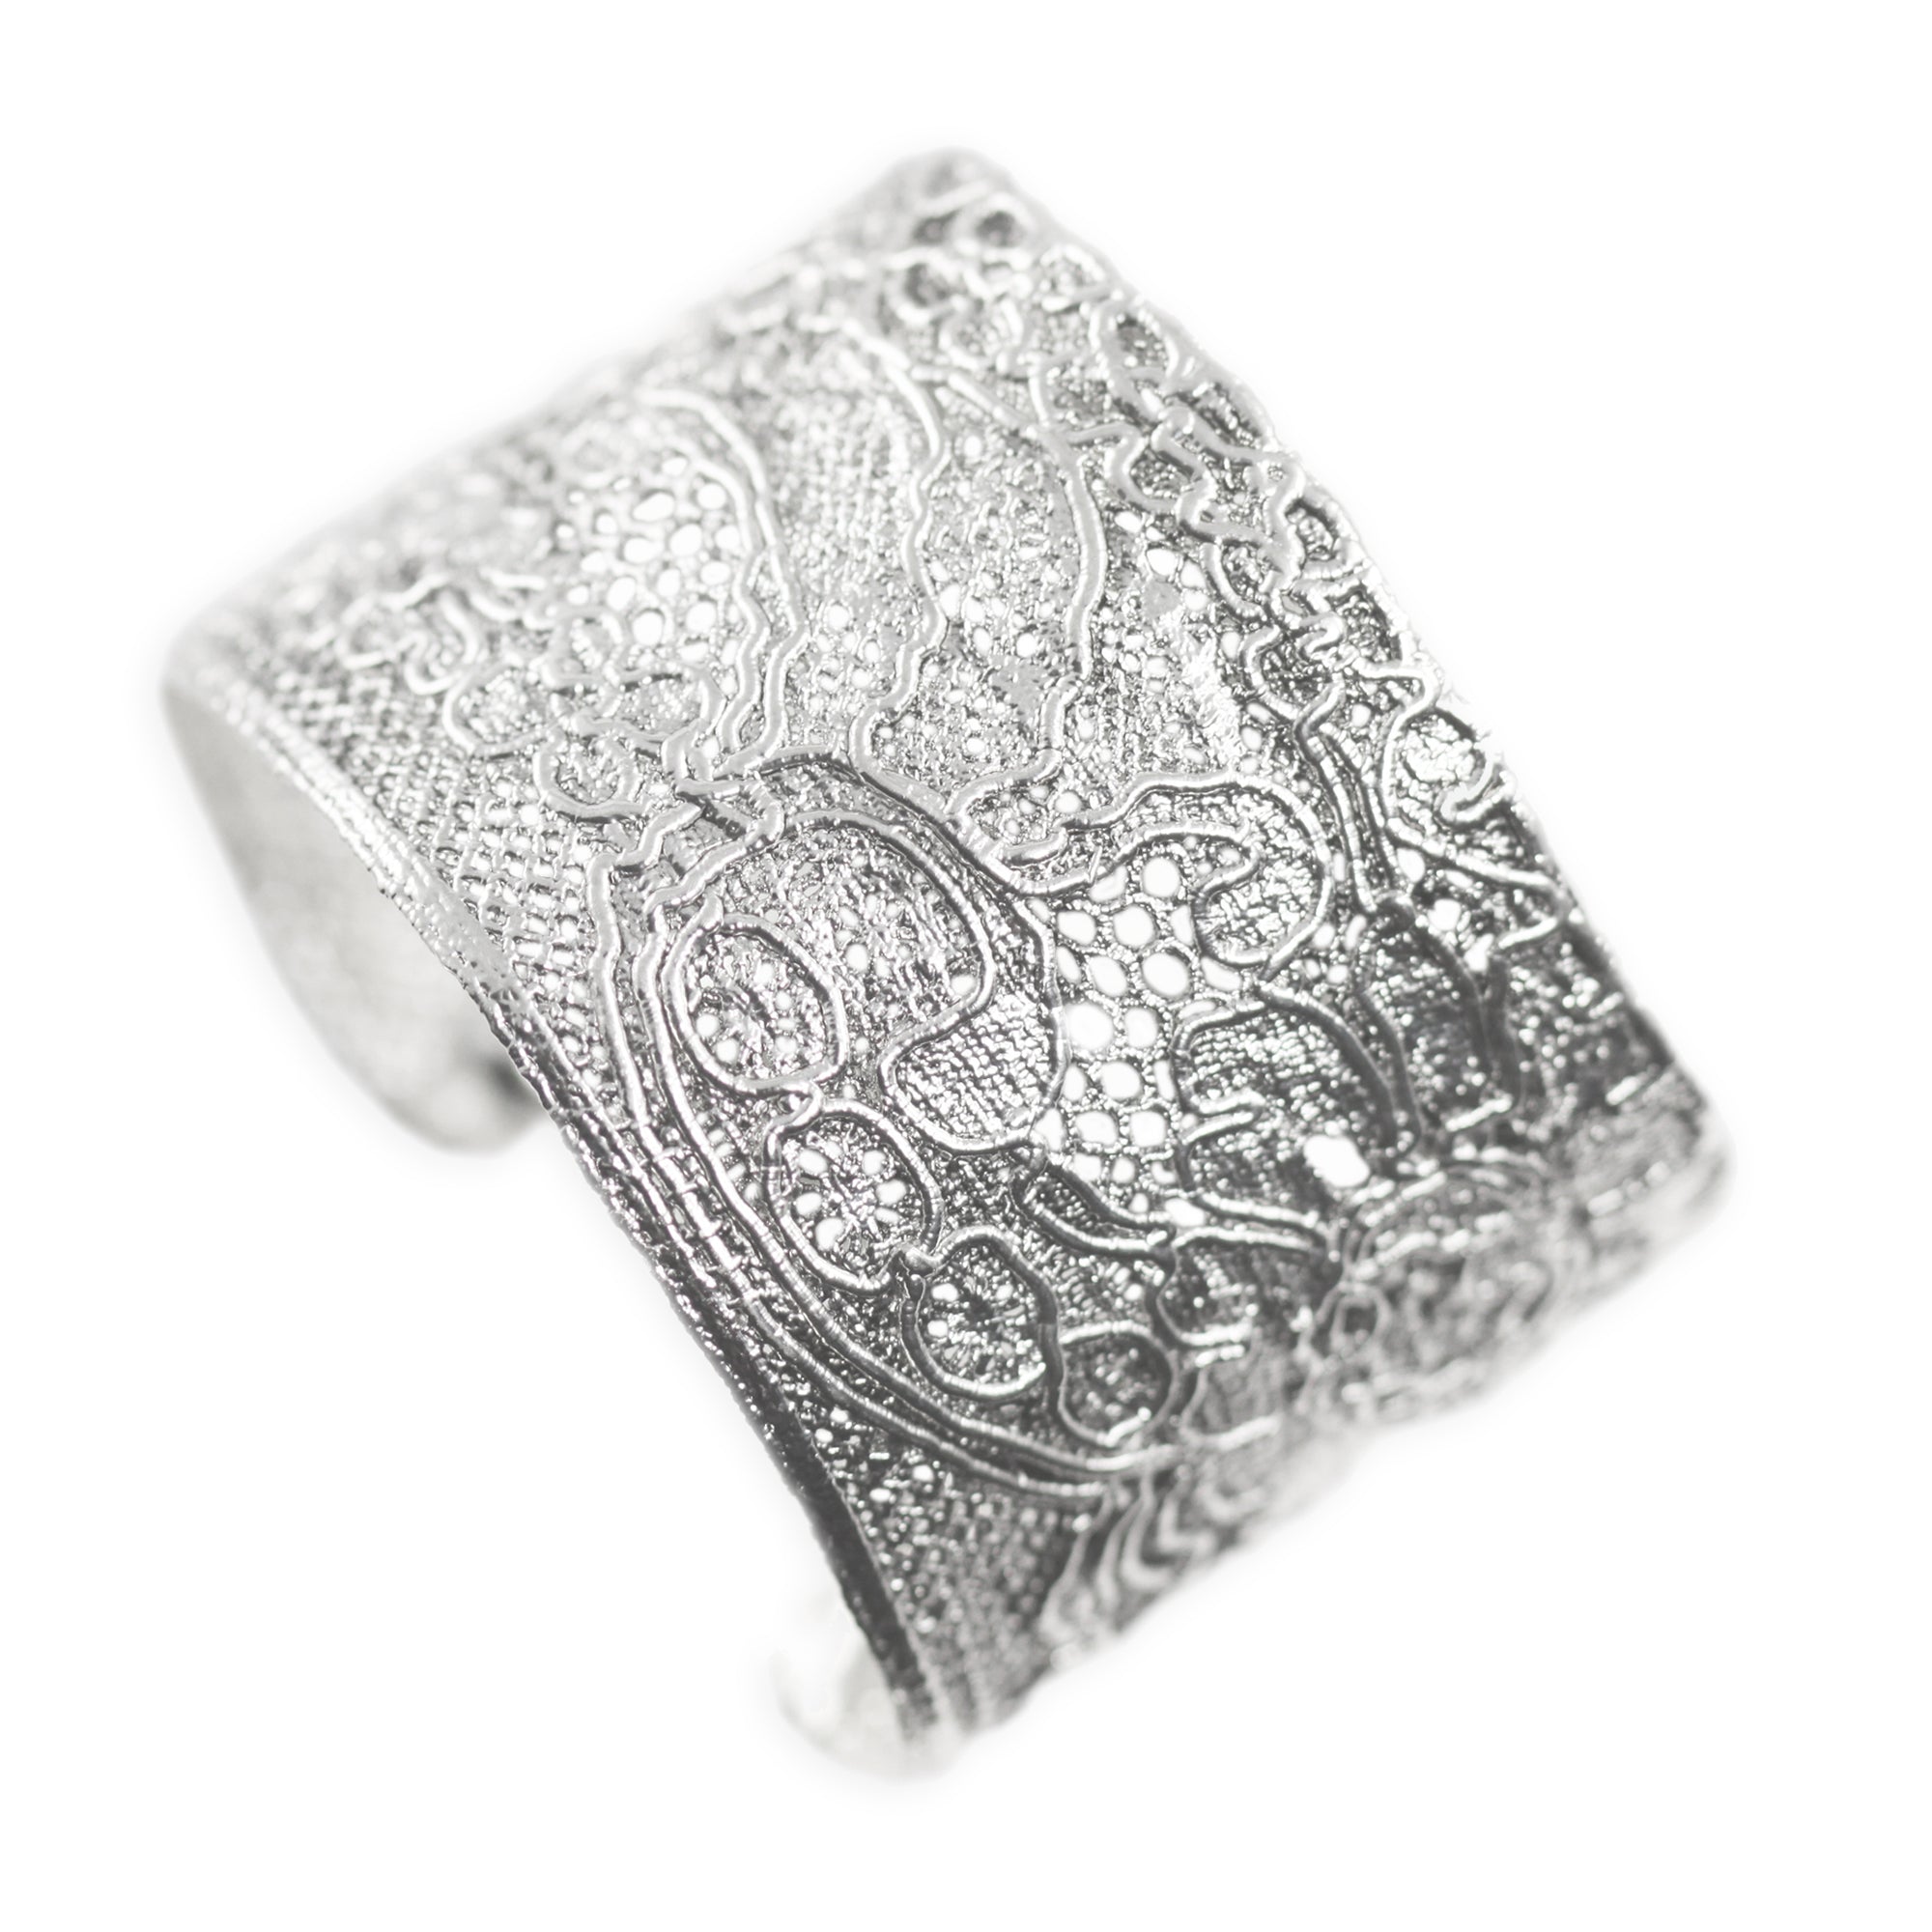 Unique cuff bracelet with an intricate design made from 1920s French lace solidified in sterling silver.